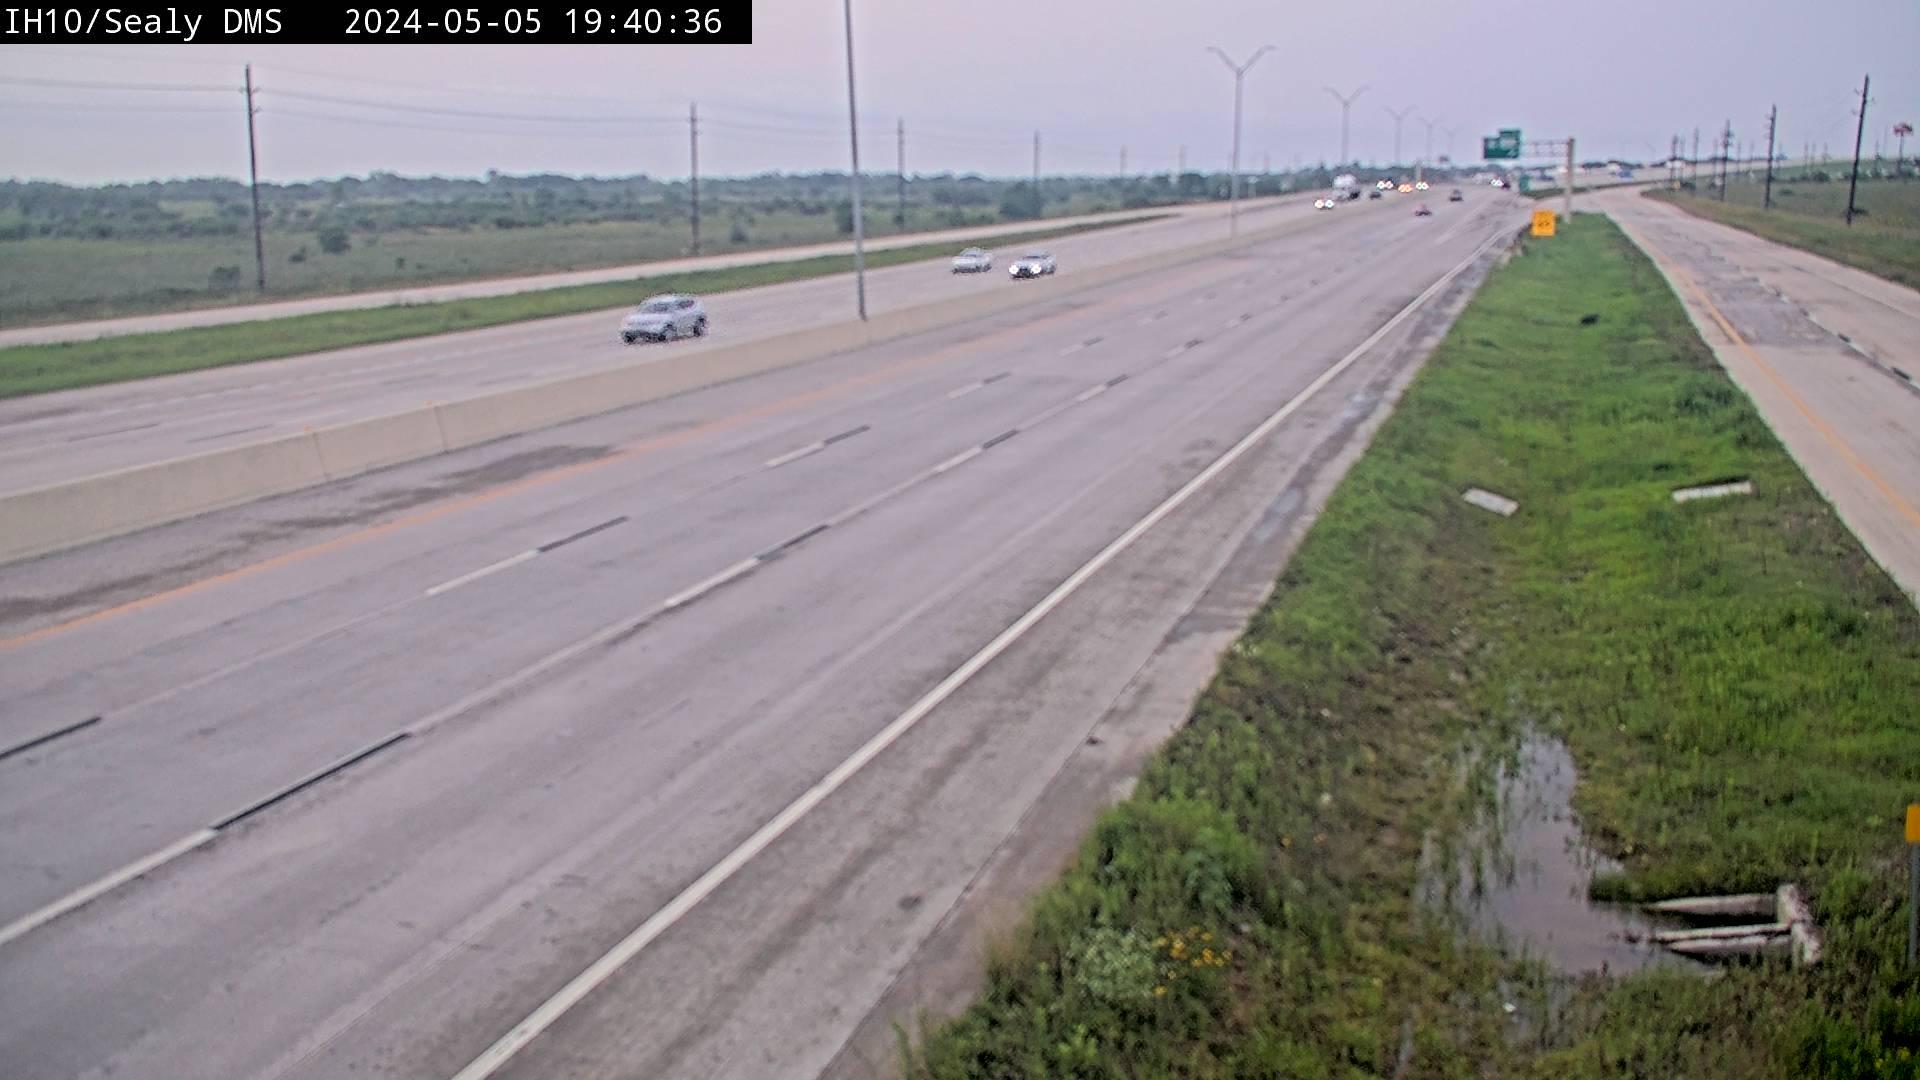 Traffic Cam Sealy › East: I-10 - DMS EB Player